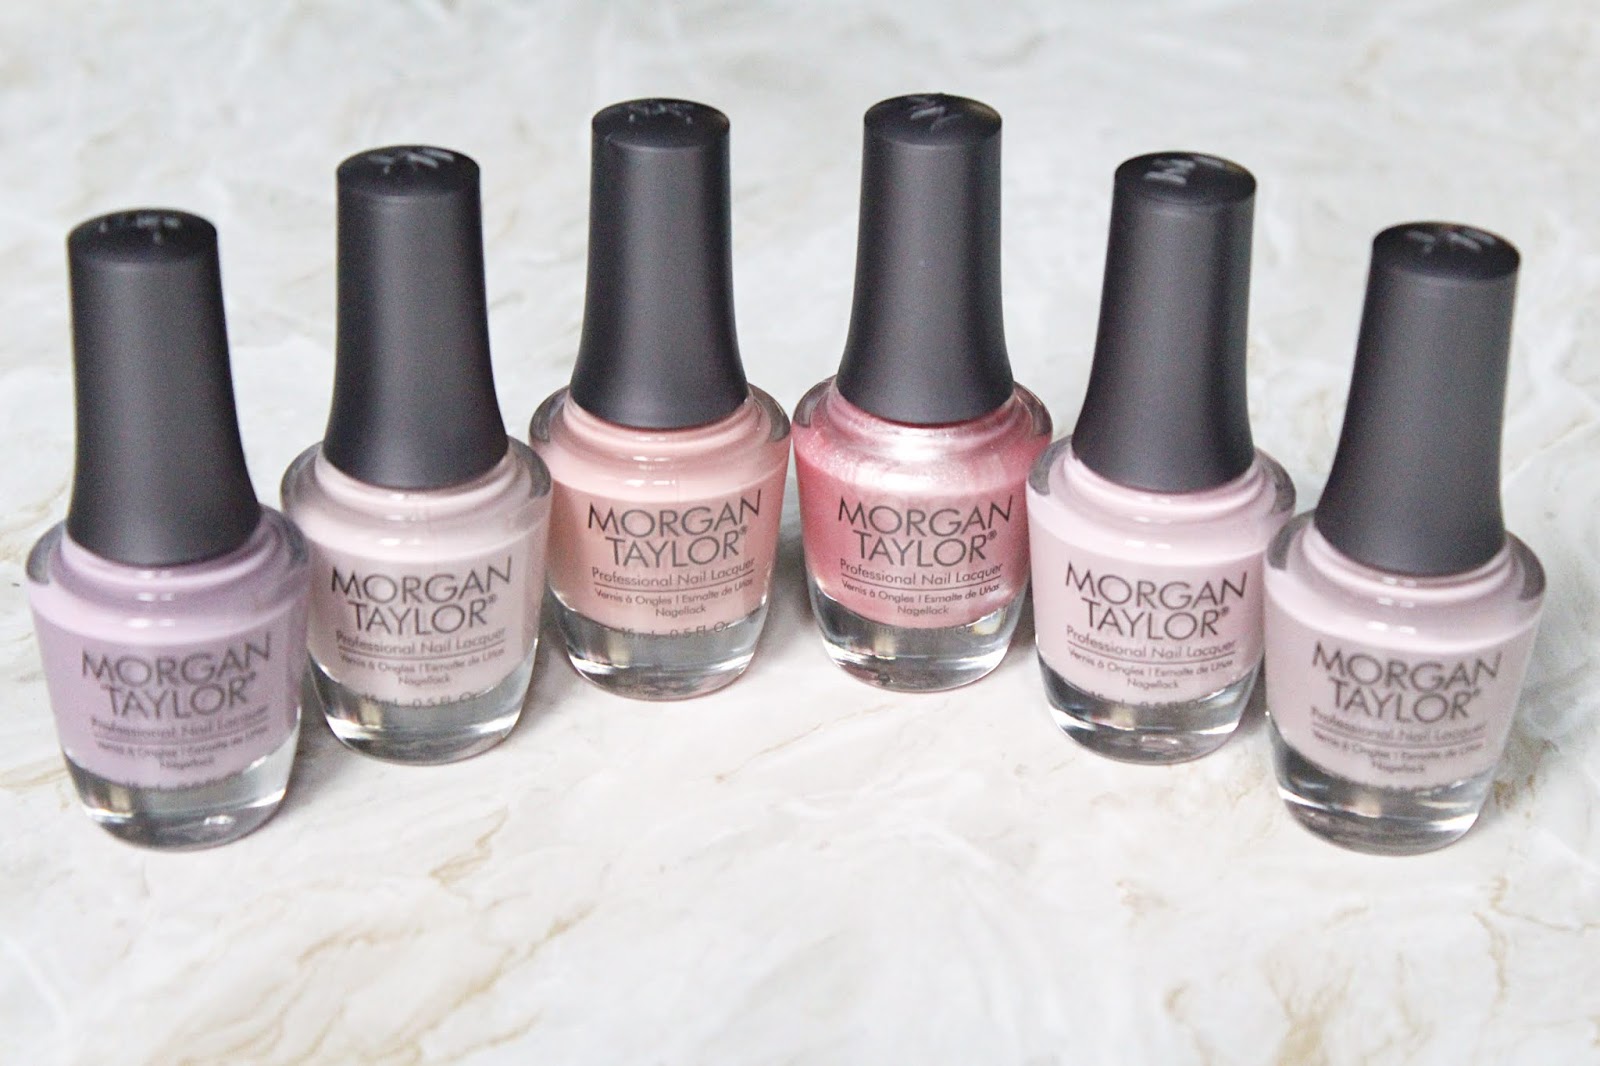 Morgan Taylor The Colour of Petals Collection Review (+ Swatches)